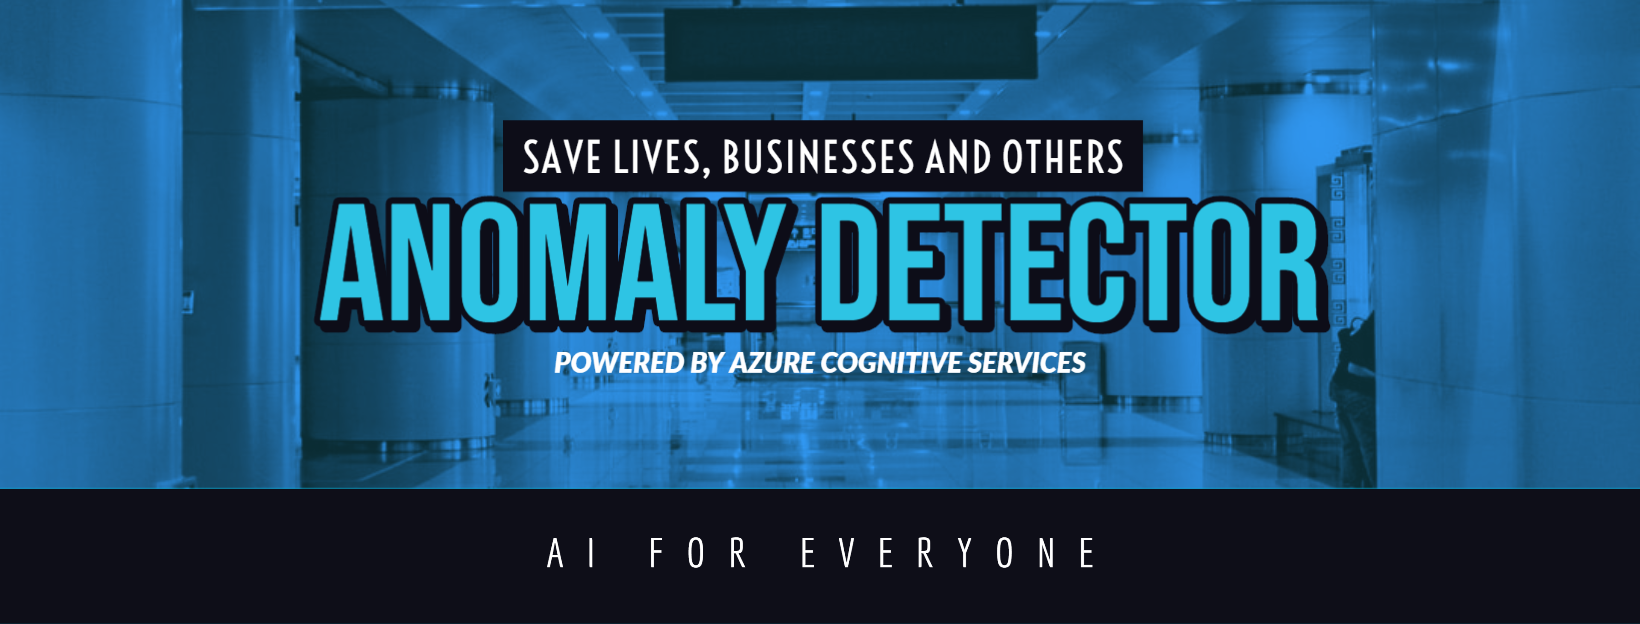 Anomaly Detector Service